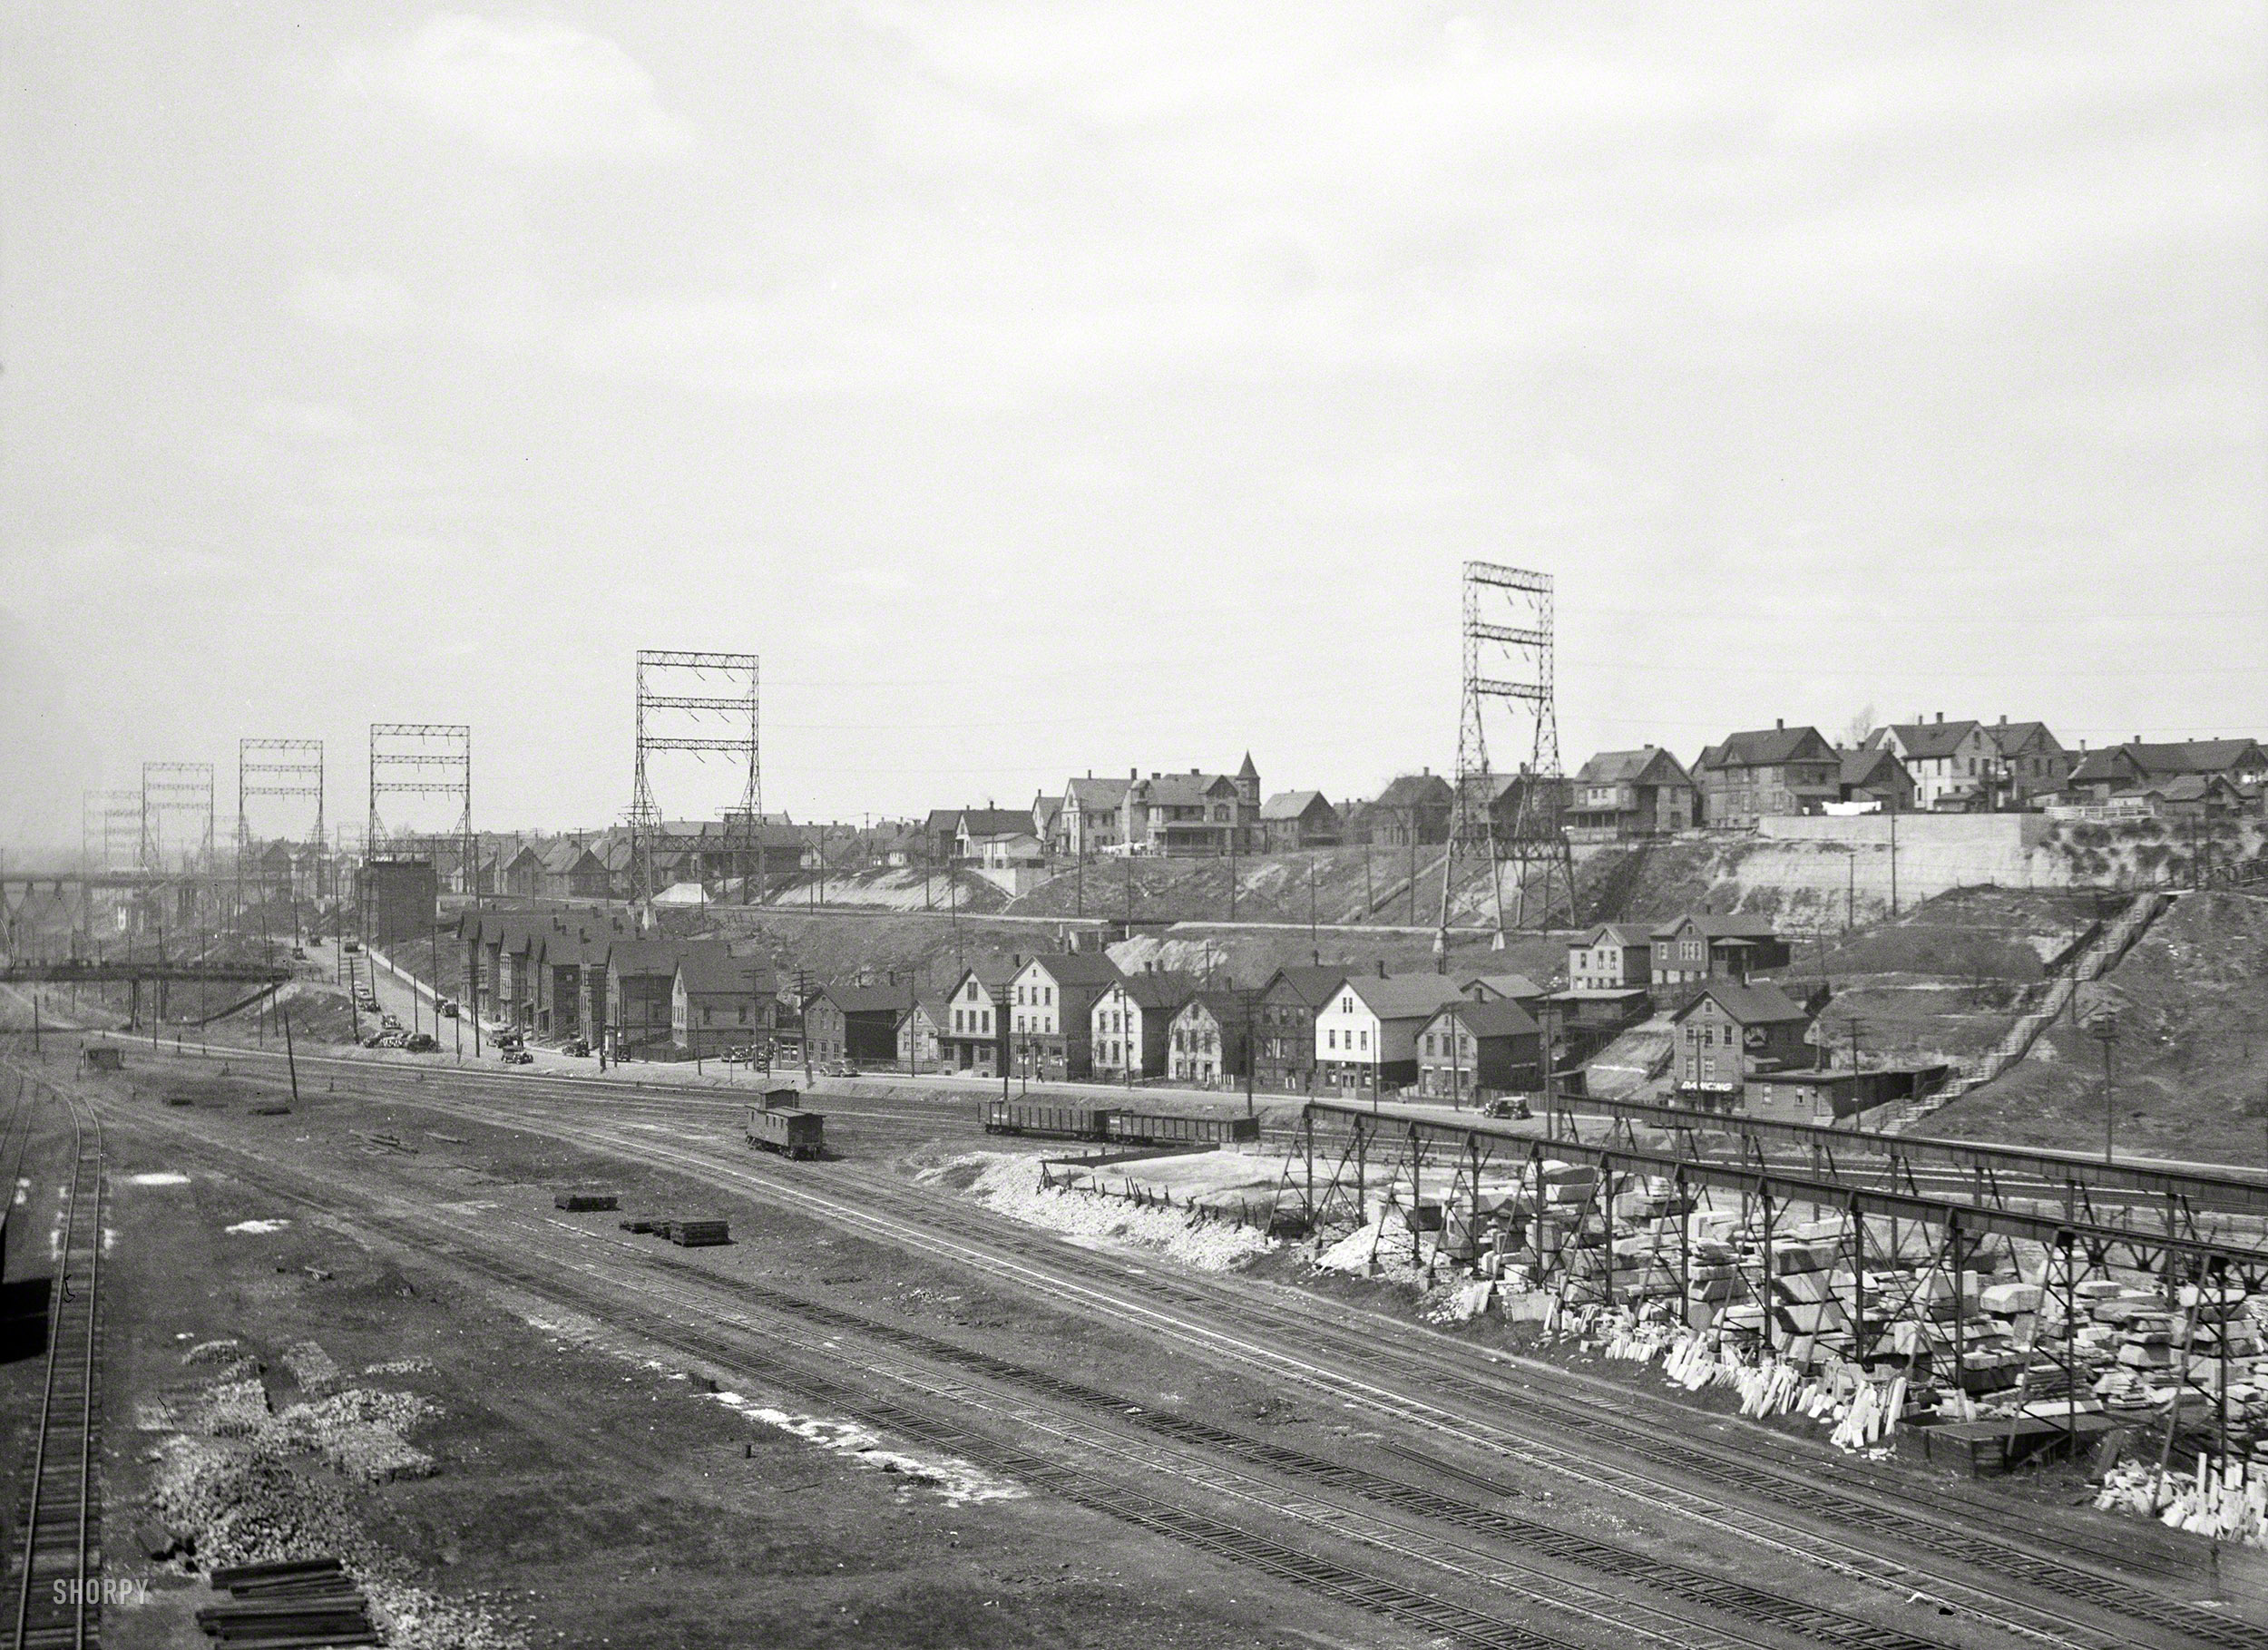 April 1936. "Chicago & Milwaukee tracks. Housing alongside electric railroad. Milwaukee freight yards and industrial plants overshadowed by residential district." Photo by Carl Mydans, Resettlement Administration. View full size.